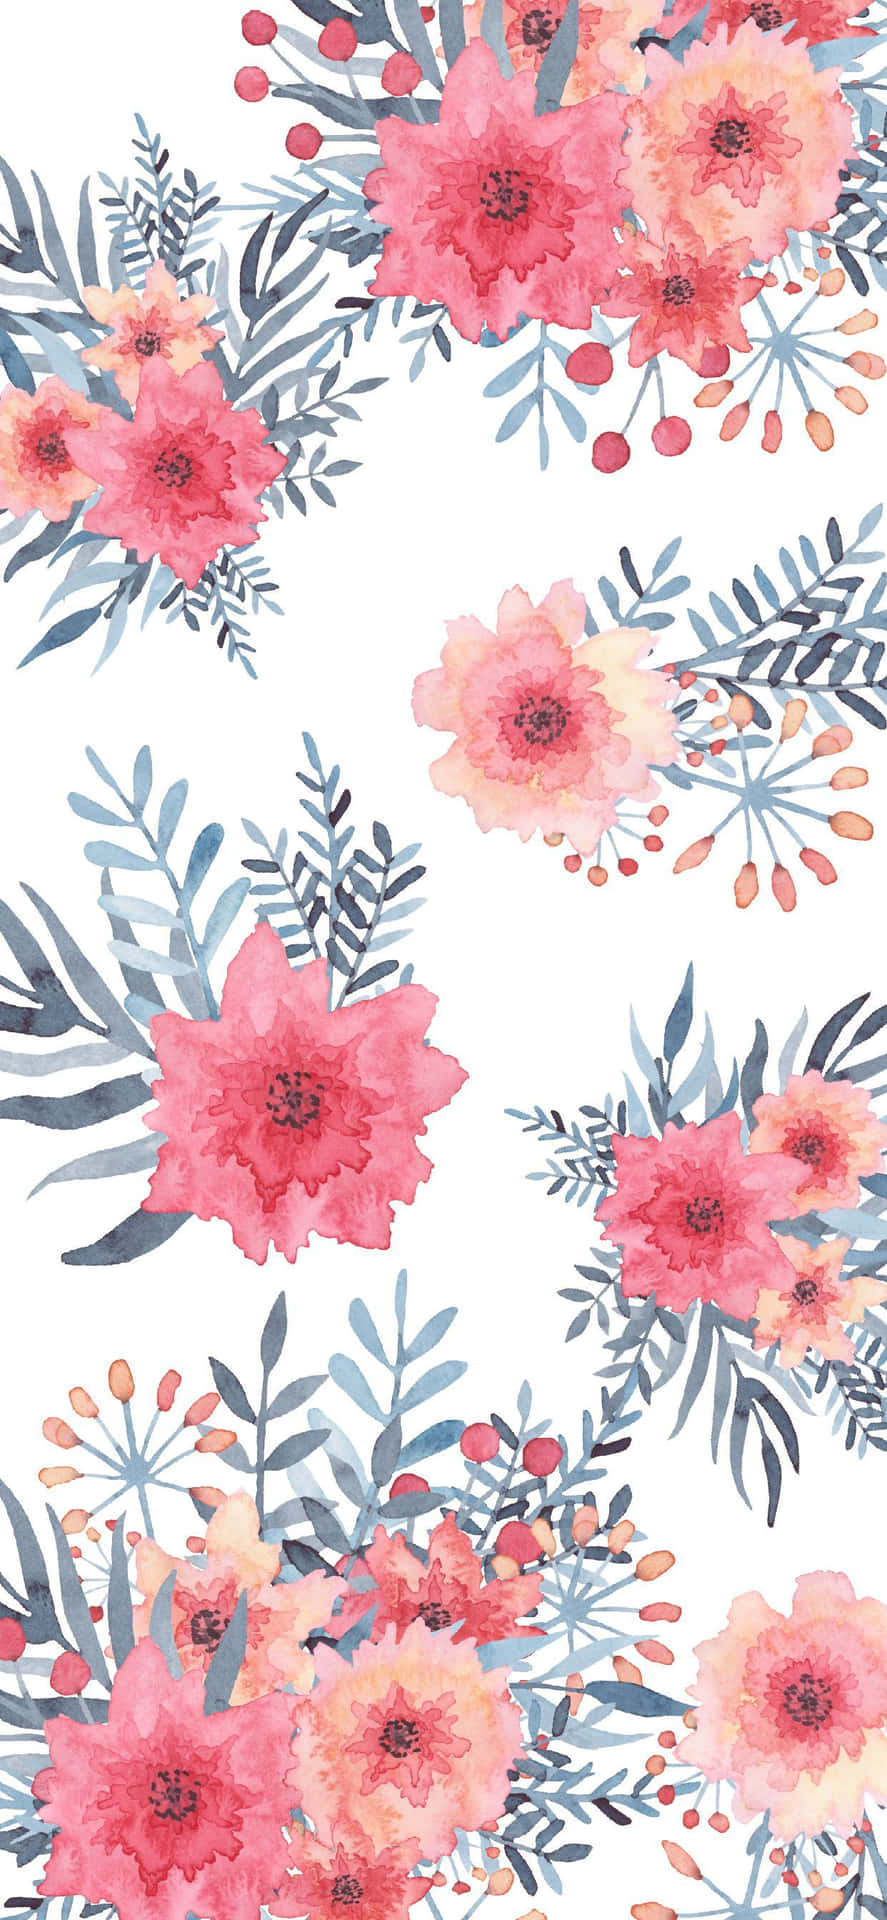 A Watercolor Floral Pattern With Pink Flowers And Leaves